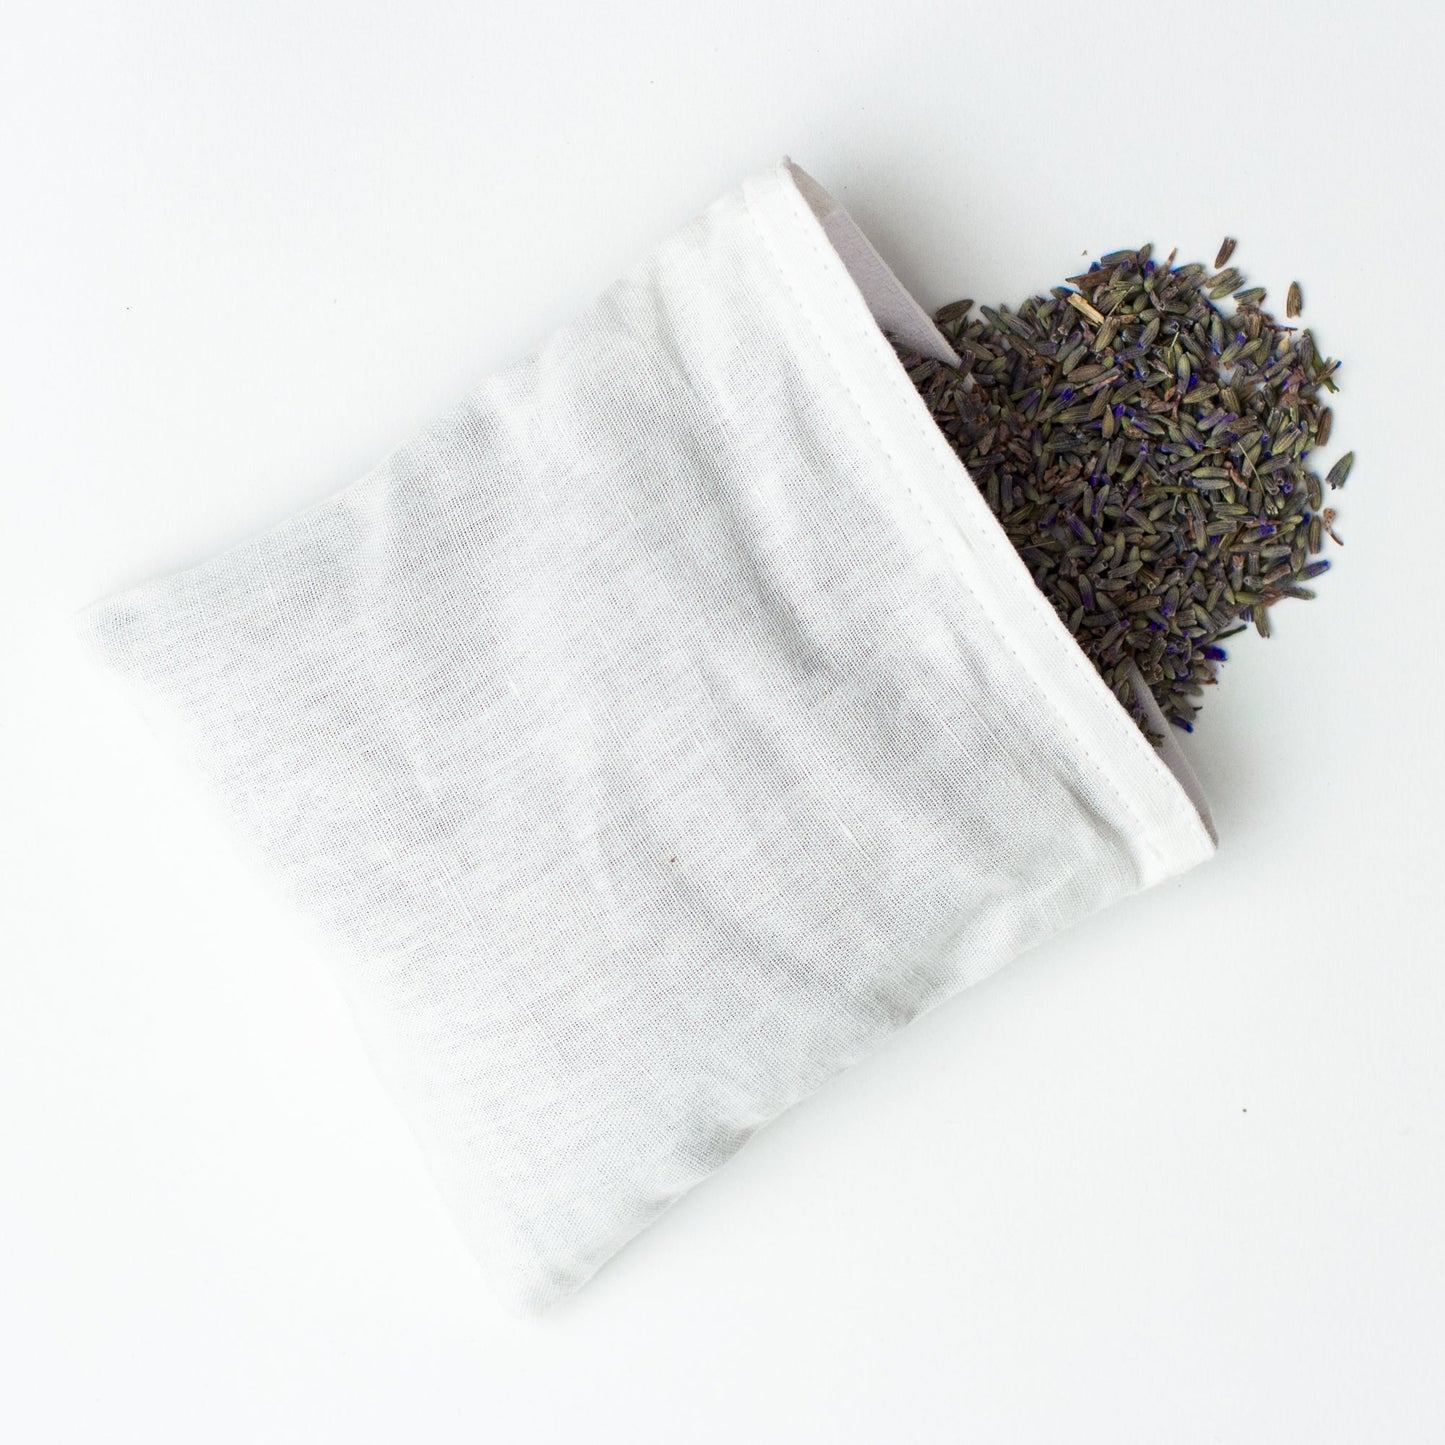 A linen pouch filled with lavender. Lavender is spilling out of the open end.